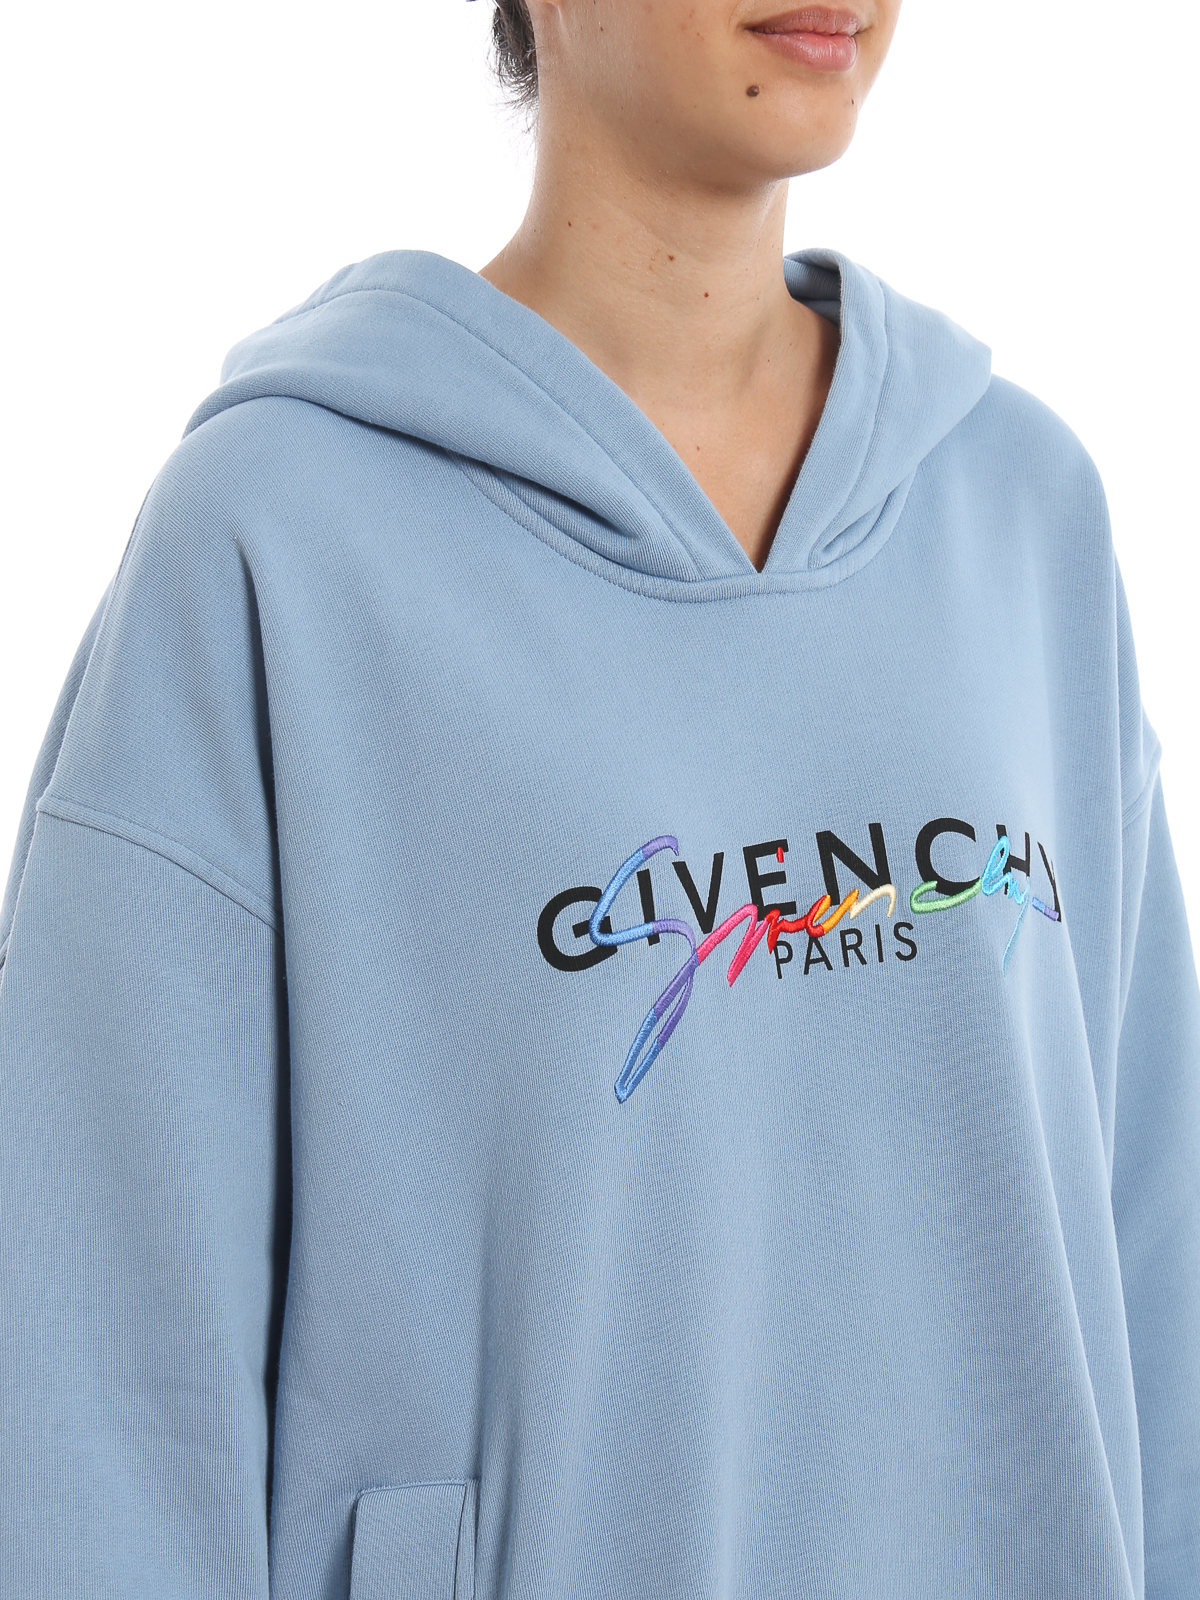 blue givenchy hoodie